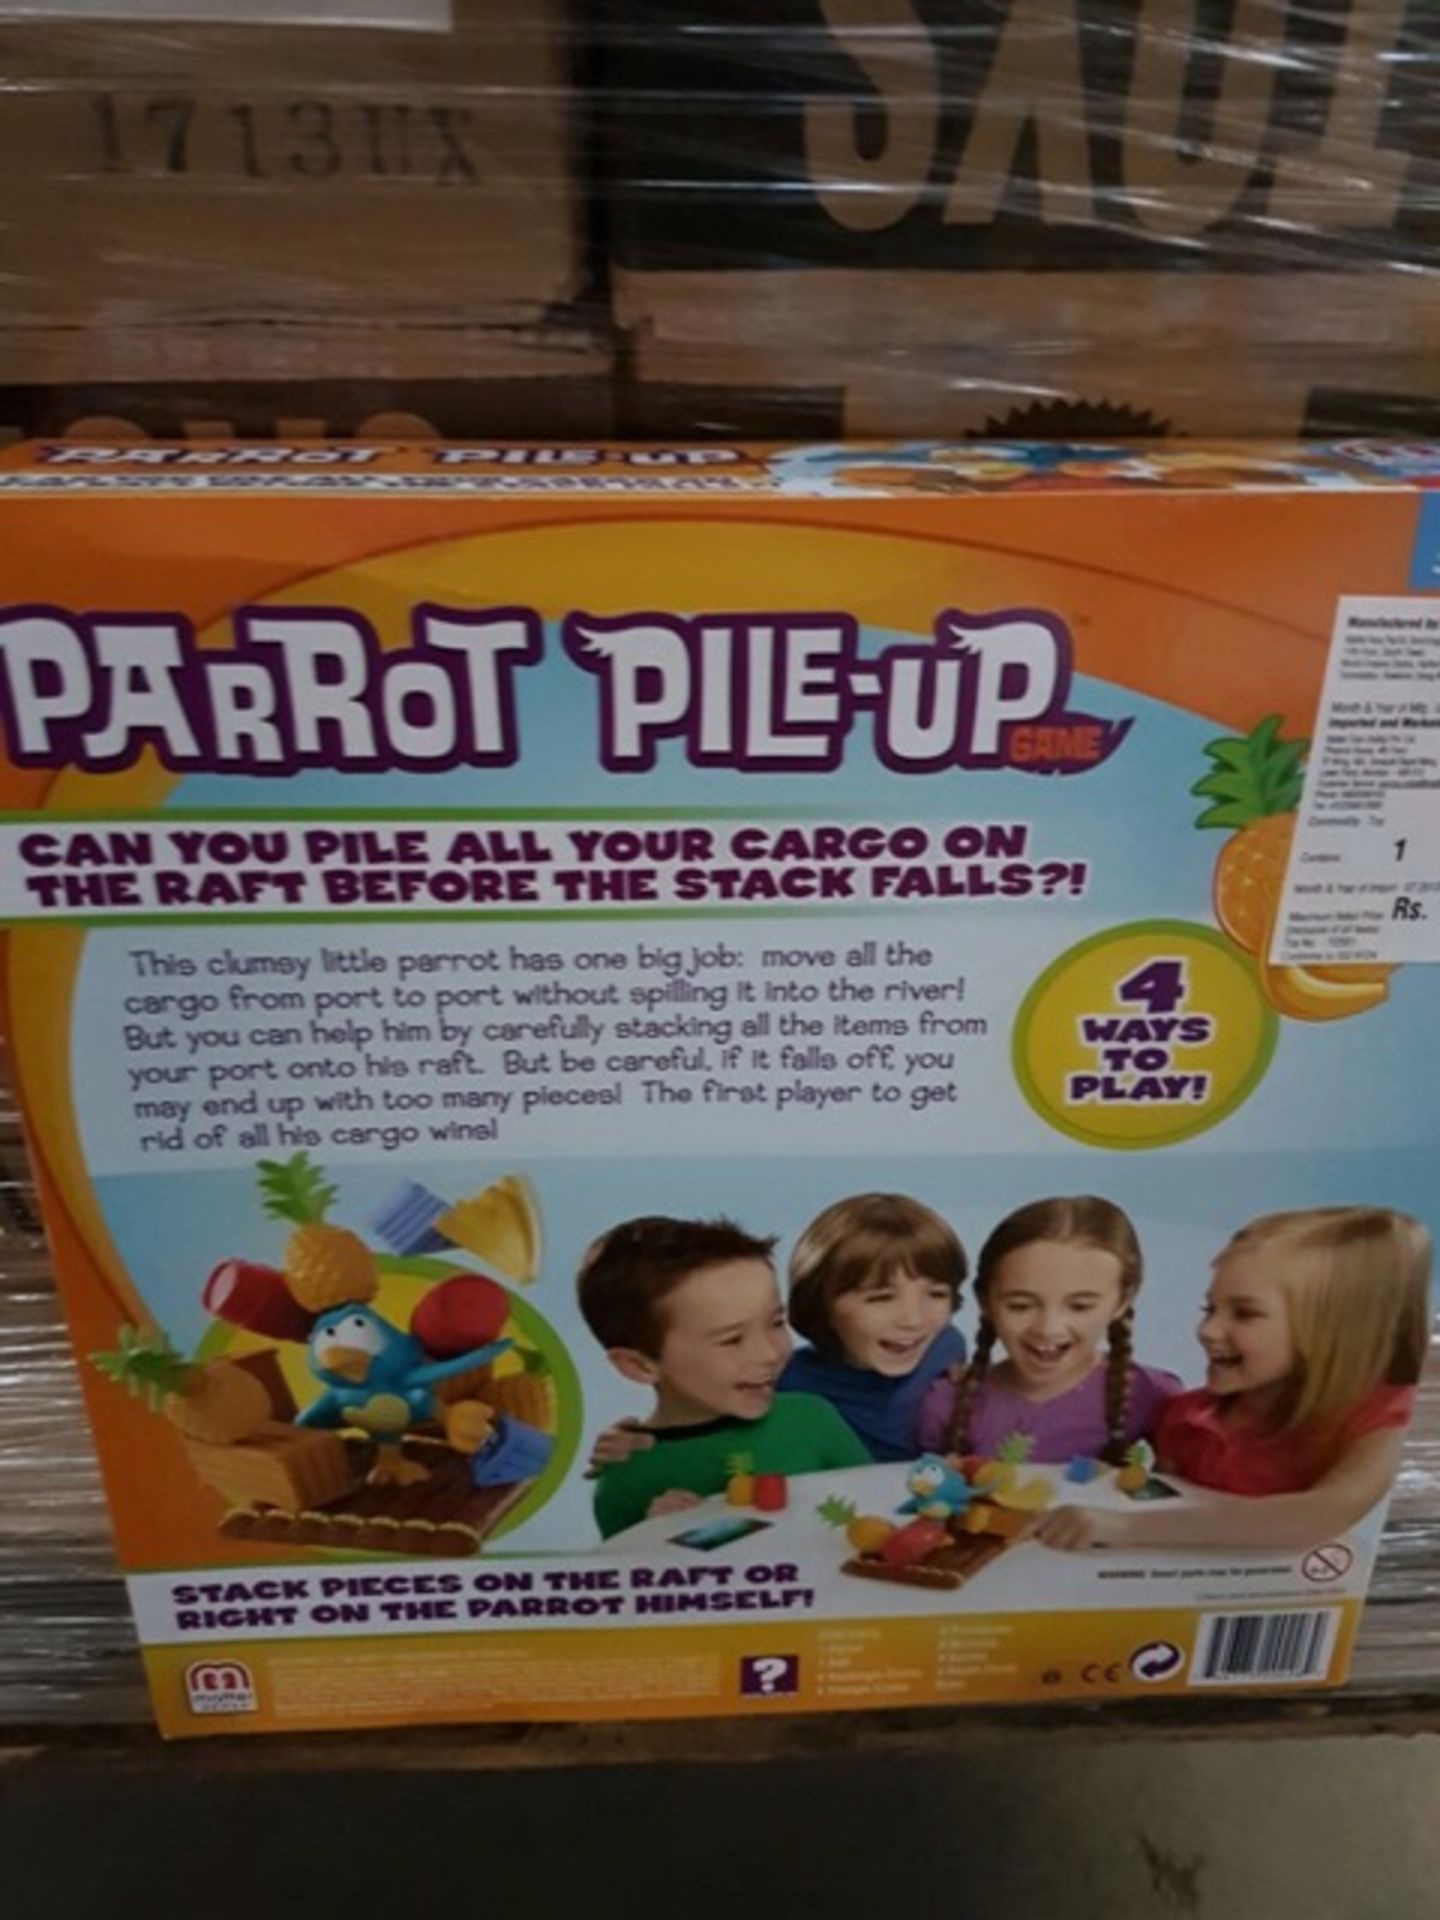 12 x Brand New Mattel Parrot Pile Up Game. Can you pile all your cargo on the raft before it - Image 2 of 2